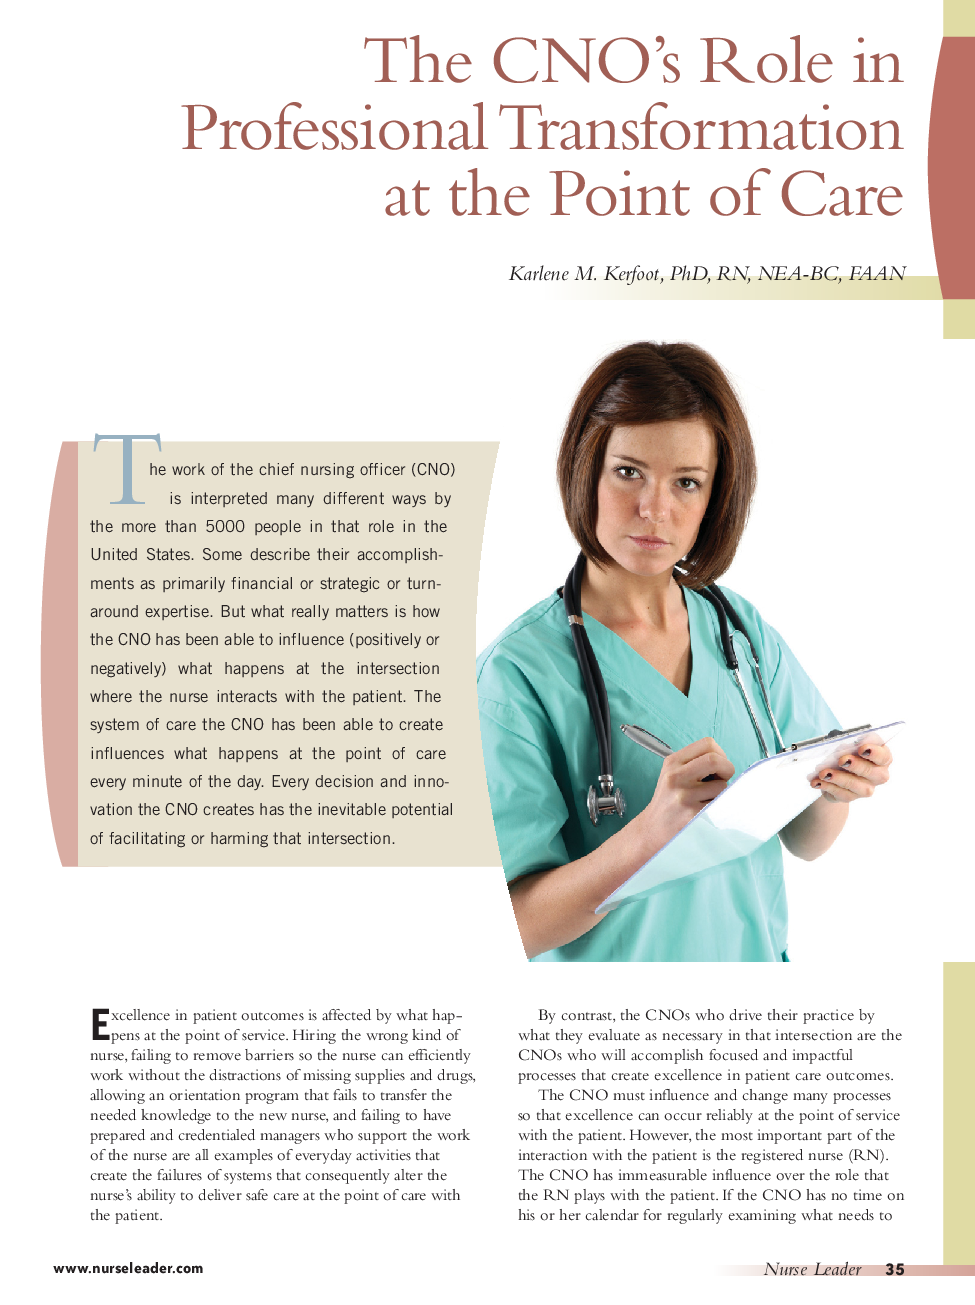 The CNO's Role in Professional Transformation at the Point of Care